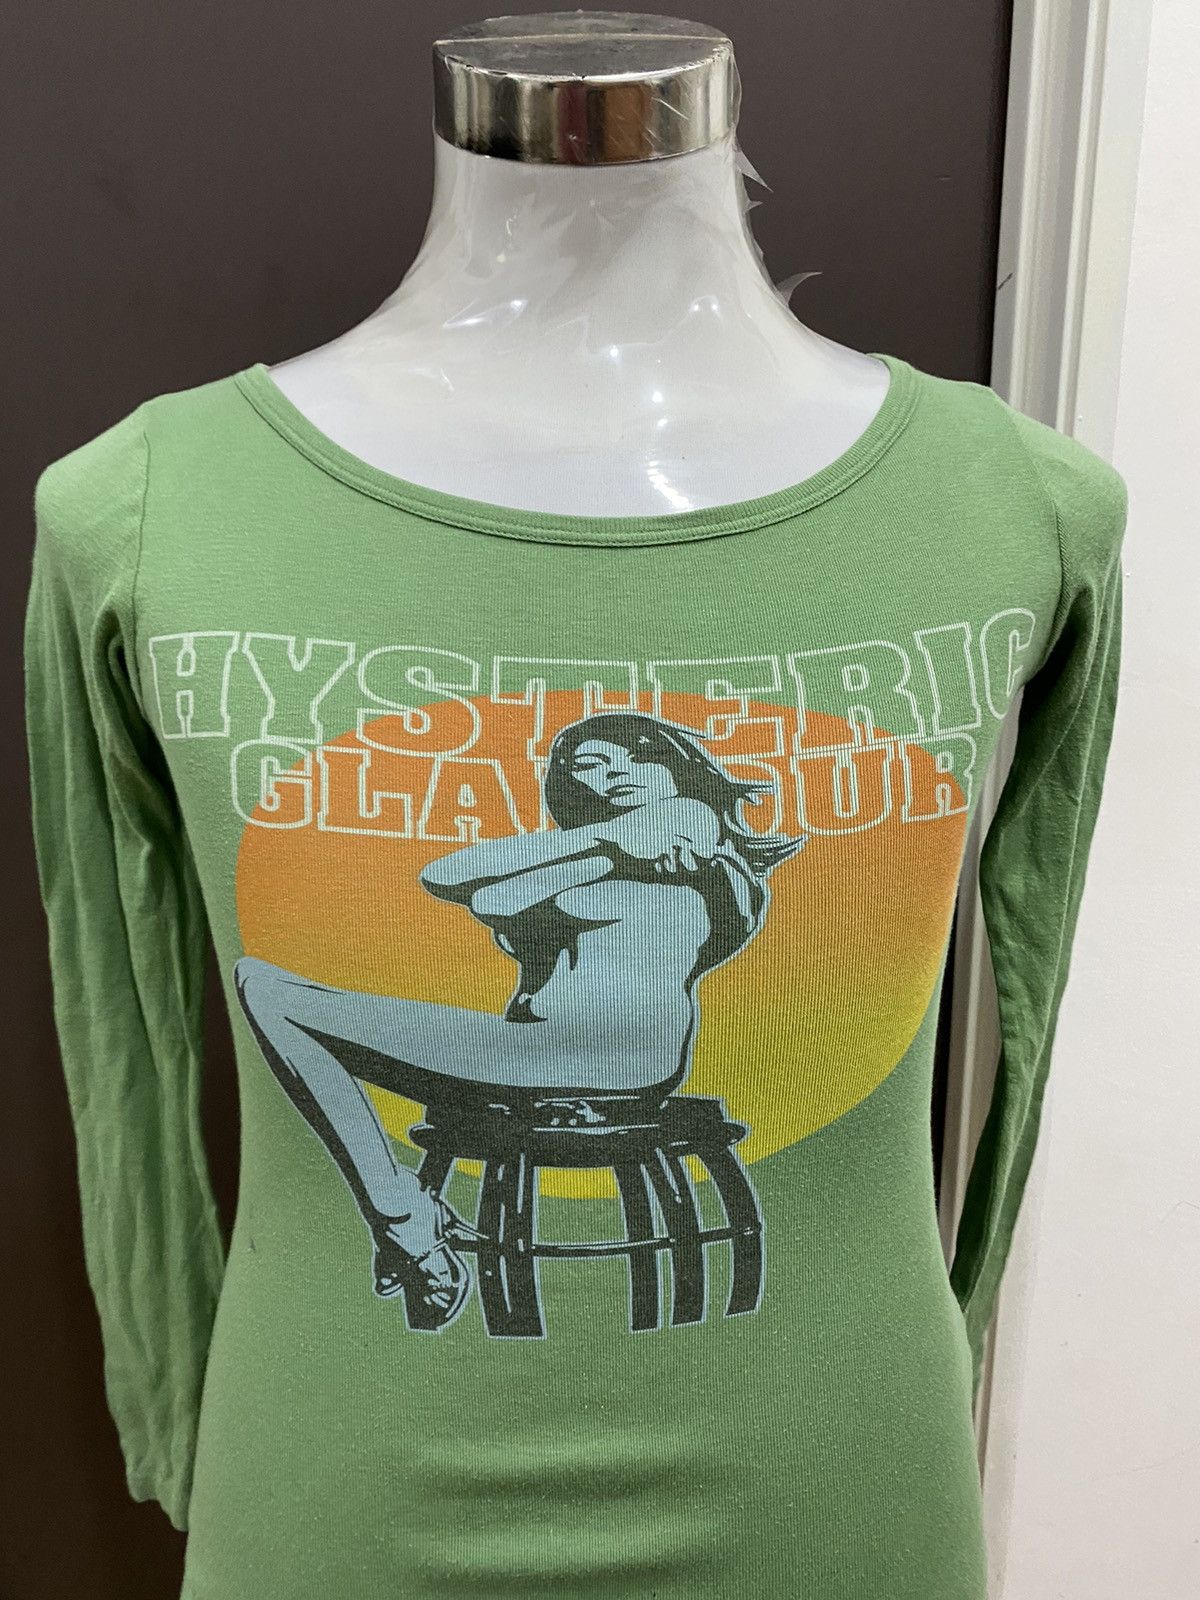 Hysteric Glamour Naked Girl Mesh L/S Shirt - 15